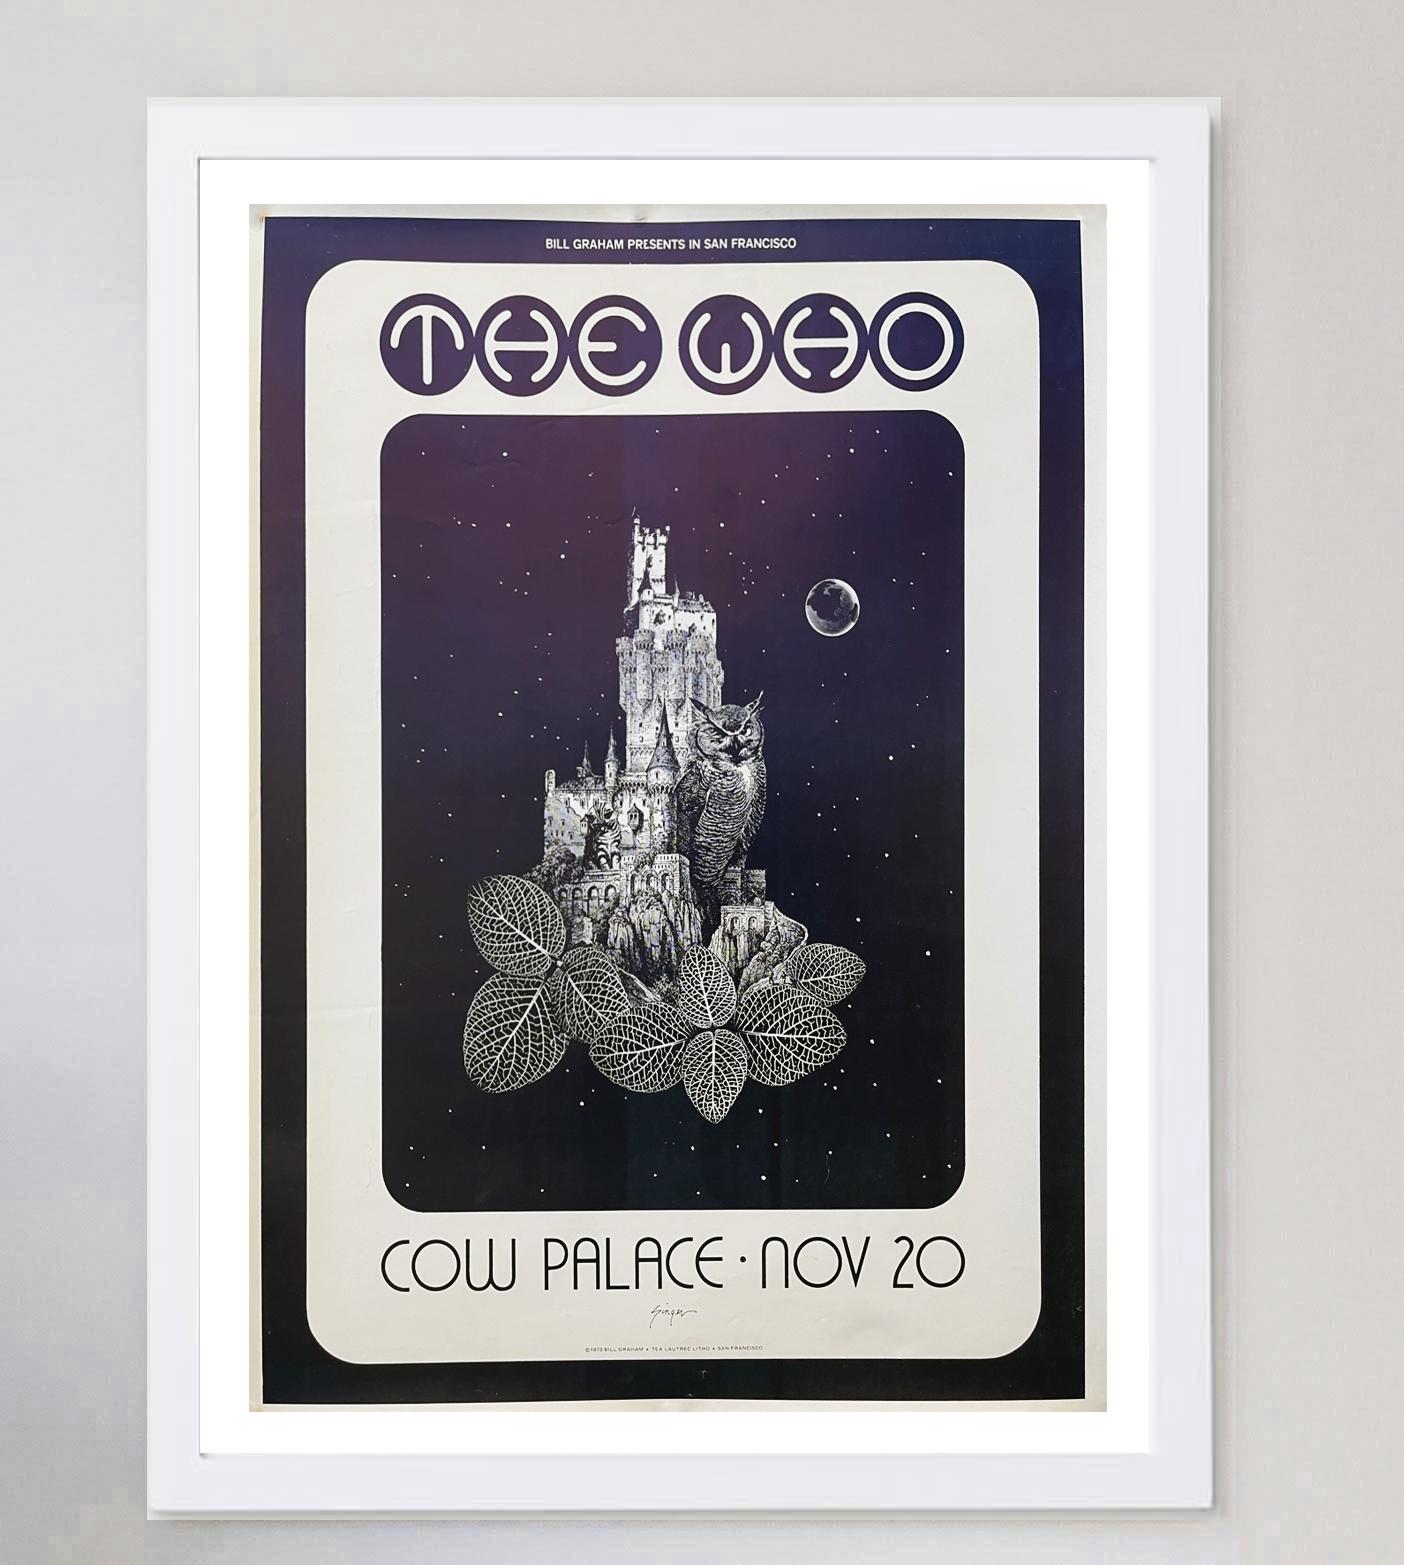 1973 The Who - Live at Cow Palace, Original-Vintage-Poster (amerikanisch) im Angebot